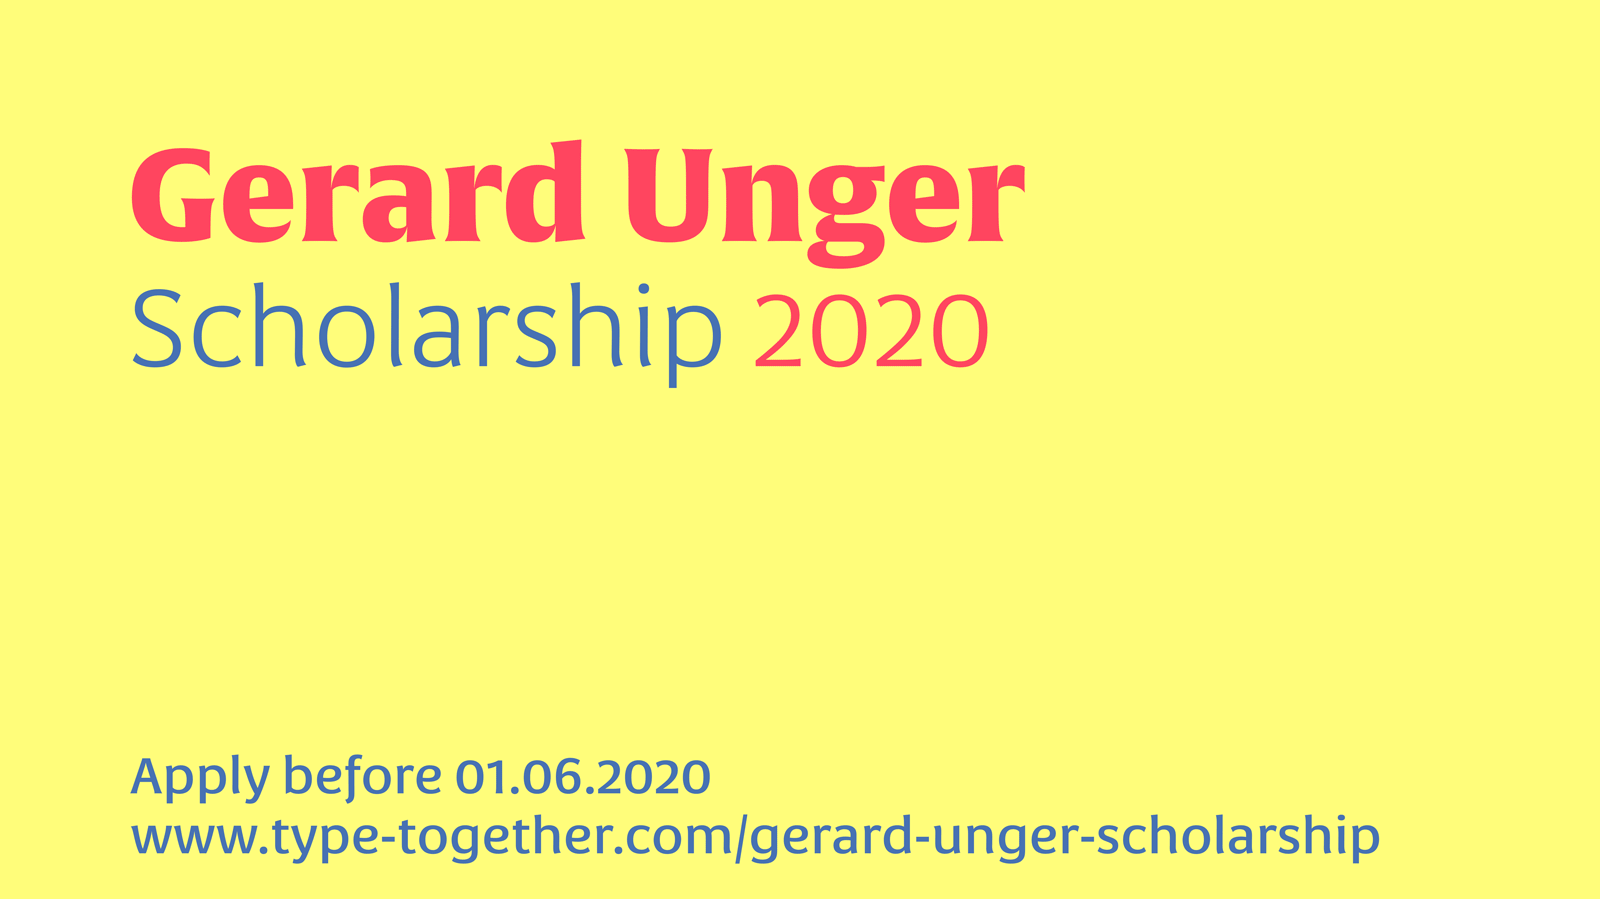 Call for entries: Gerard Unger Scholarship